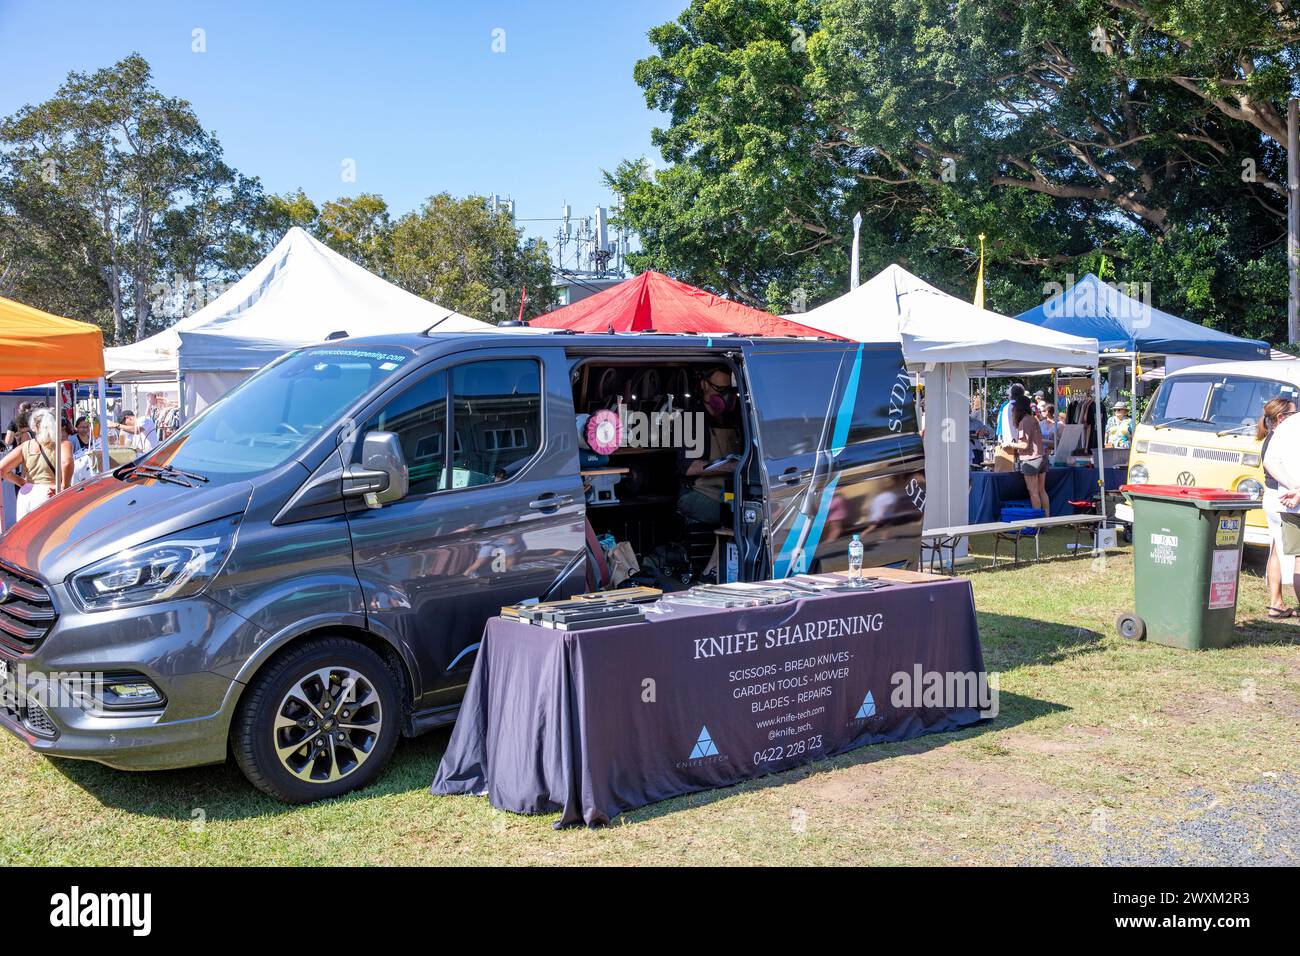 Knife sharpening, man working from his van offers knives sharpening service business at a Sydney Easter markets day, NSW,Australia Stock Photo